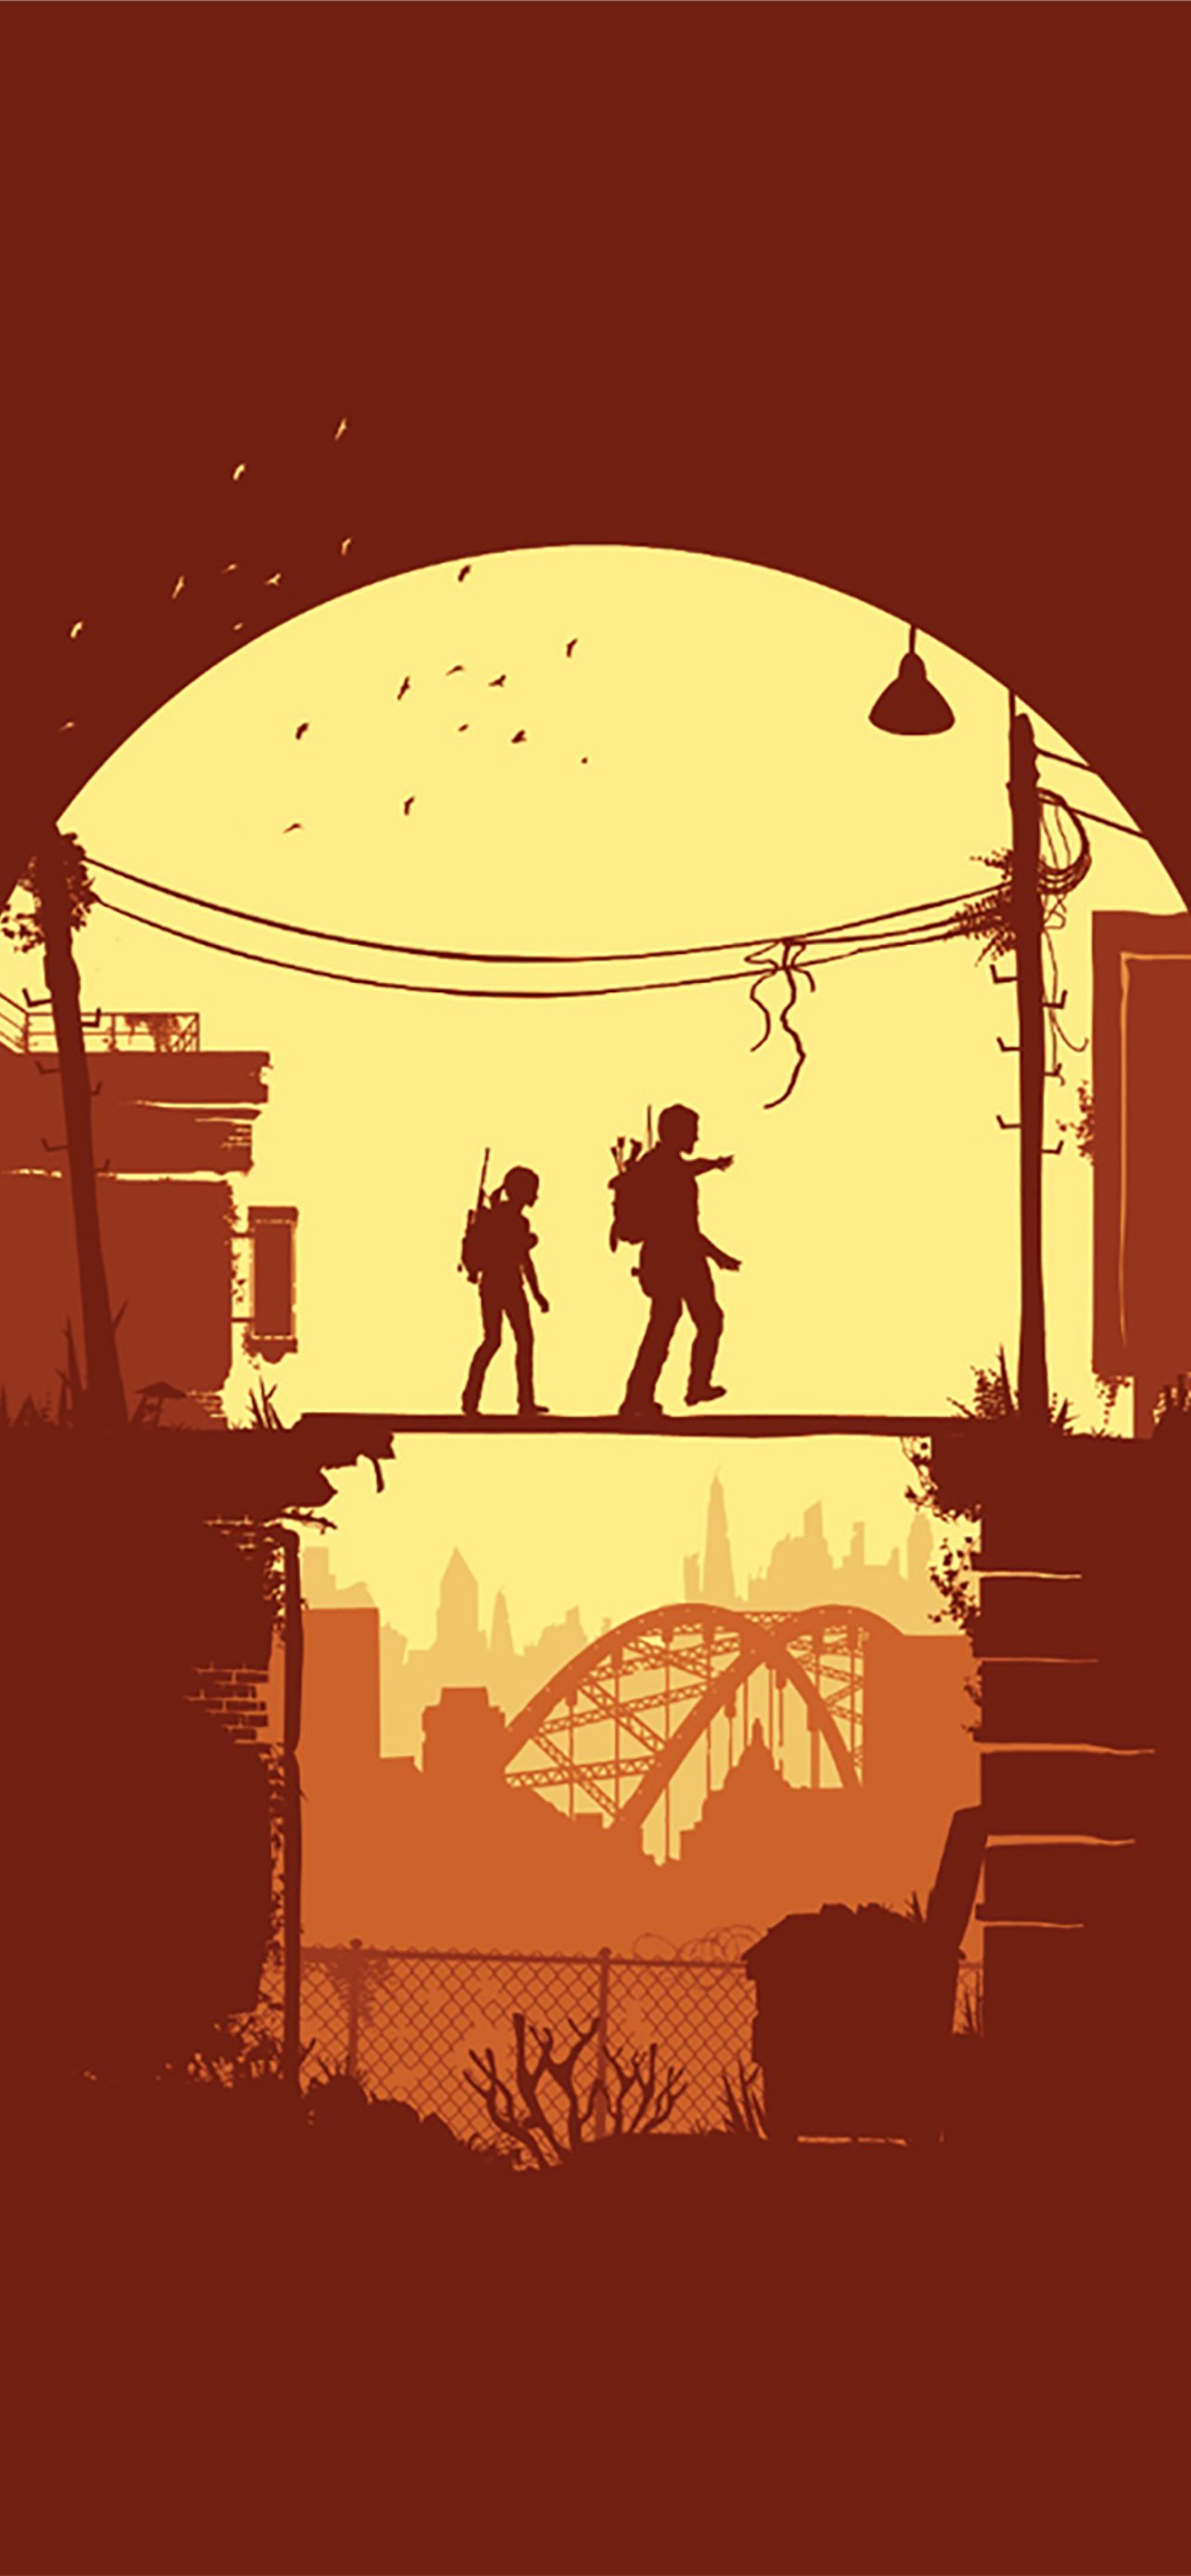 Last of Us Aesthetic Wallpapers - Free iPhone Game Wallpapers